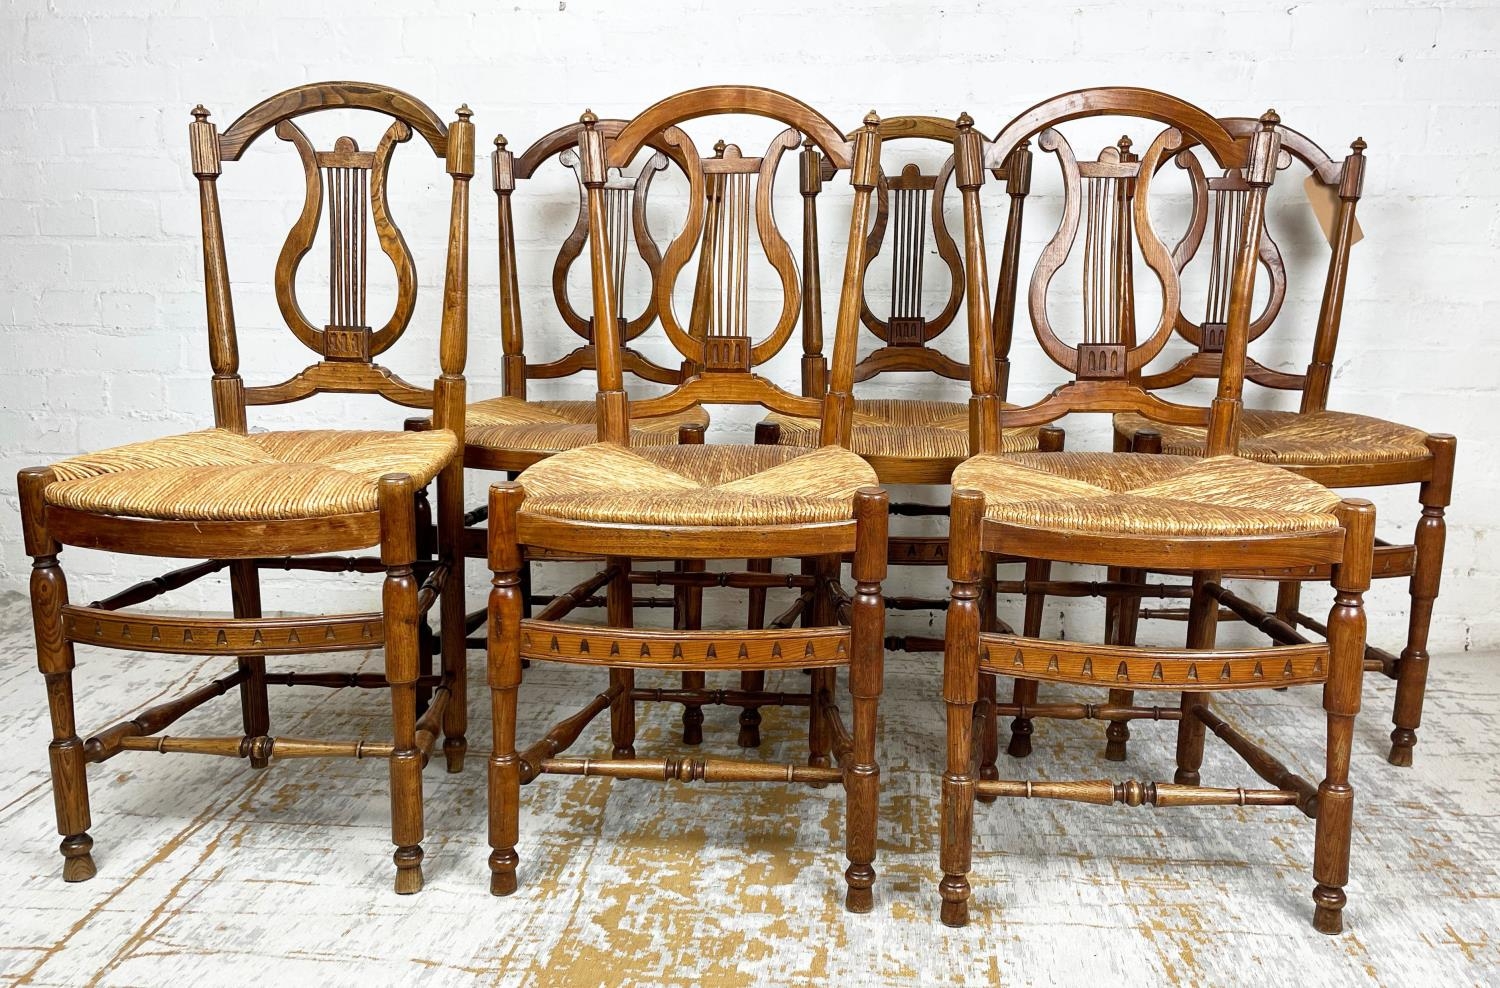 DINING CHAIRS, six, late 19th century French Provincial ash with lyre backs and rush seats. (6)